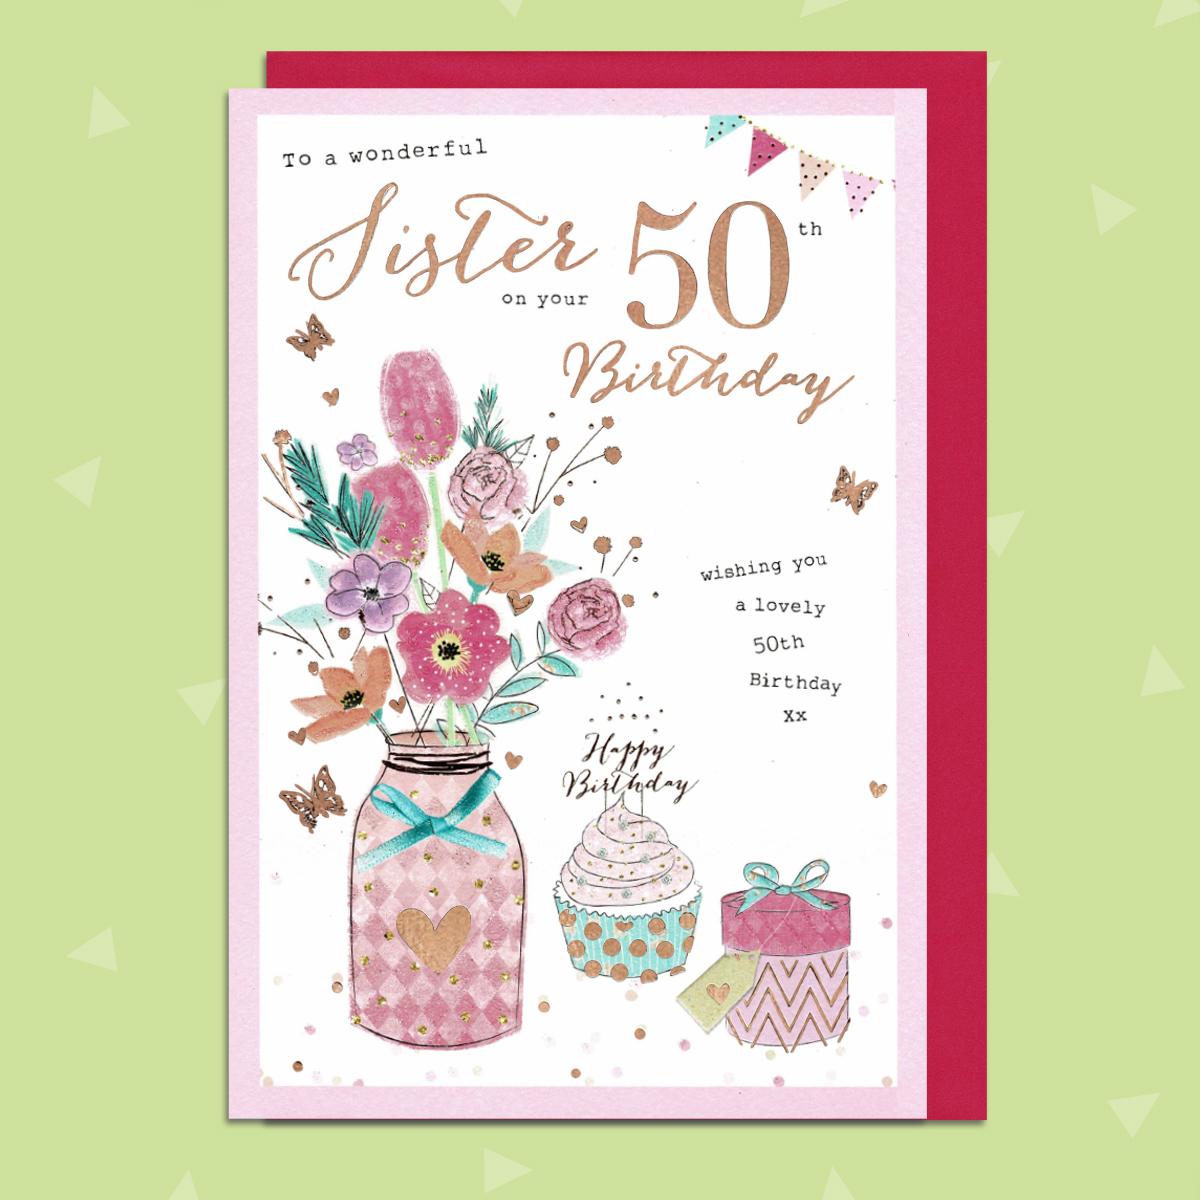 Sister On Your 50th Birthday Card Featuring A Cakes And Flowers